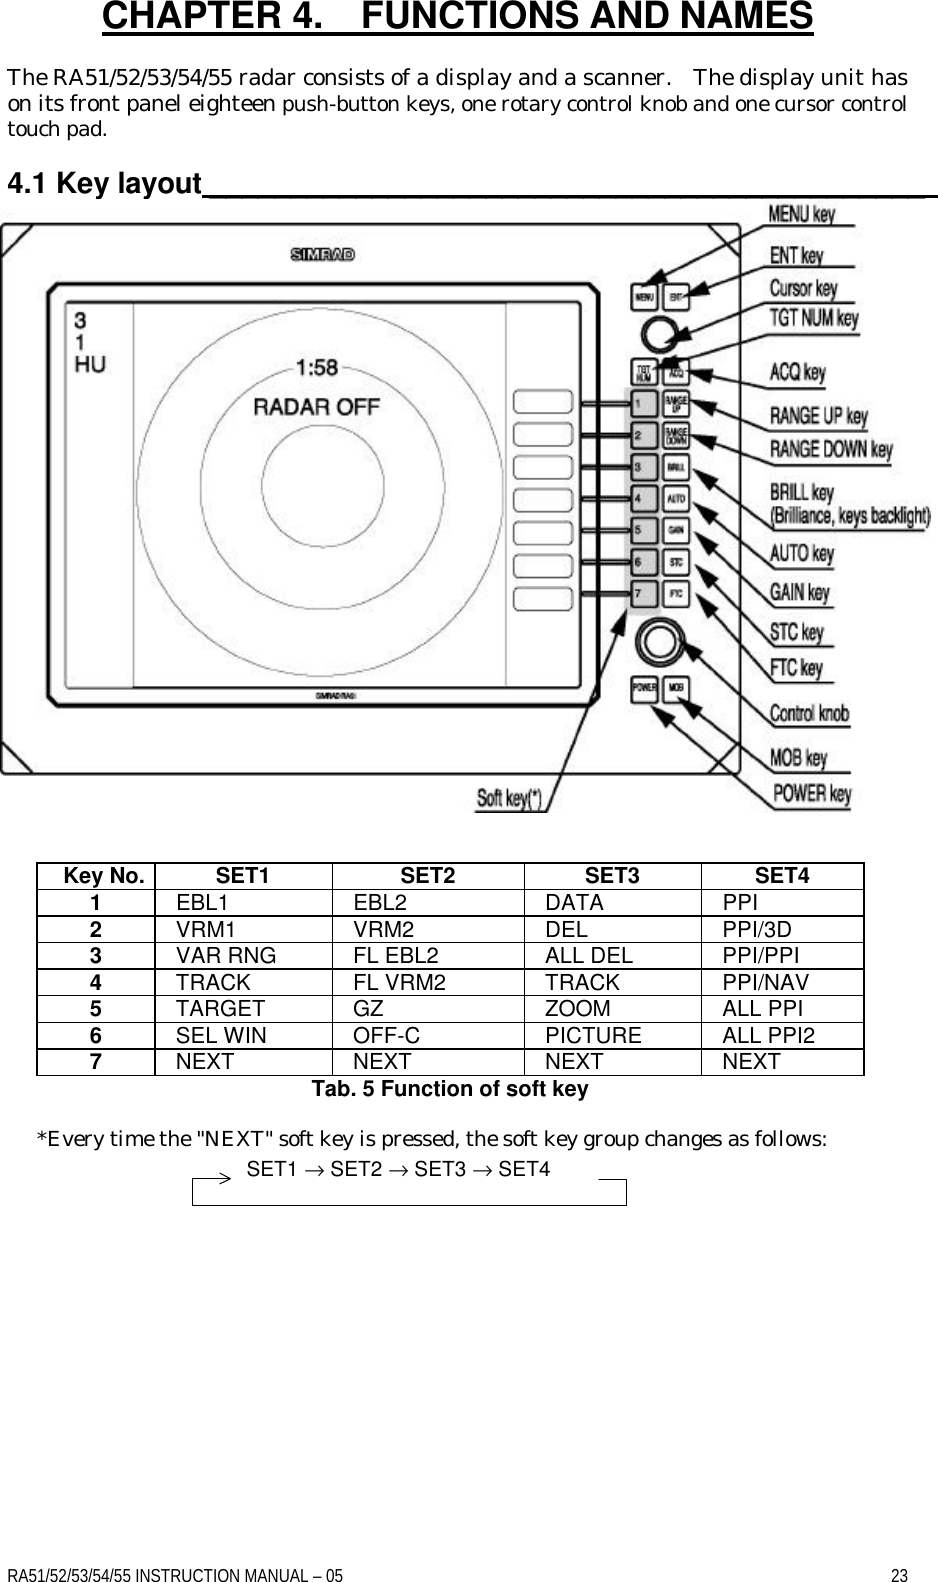 RA51/52/53/54/55 INSTRUCTION MANUAL – 05    23 CHAPTER 4.  FUNCTIONS AND NAMES  The RA51/52/53/54/55 radar consists of a display and a scanner.  The display unit has on its front panel eighteen push-button keys, one rotary control knob and one cursor control touch pad.  4.1 Key layout ____________________________________________    Key No. SET1 SET2 SET3 SET4 1  EBL1  EBL2  DATA  PPI 2  VRM1  VRM2  DEL  PPI/3D 3  VAR RNG  FL EBL2  ALL DEL  PPI/PPI 4  TRACK  FL VRM2  TRACK  PPI/NAV 5  TARGET  GZ  ZOOM  ALL PPI 6  SEL WIN  OFF-C  PICTURE  ALL PPI2 7  NEXT  NEXT  NEXT  NEXT Tab. 5 Function of soft key     *Every time the &quot;NEXT&quot; soft key is pressed, the soft key group changes as follows:     SET1 → SET2 → SET3 → SET4 